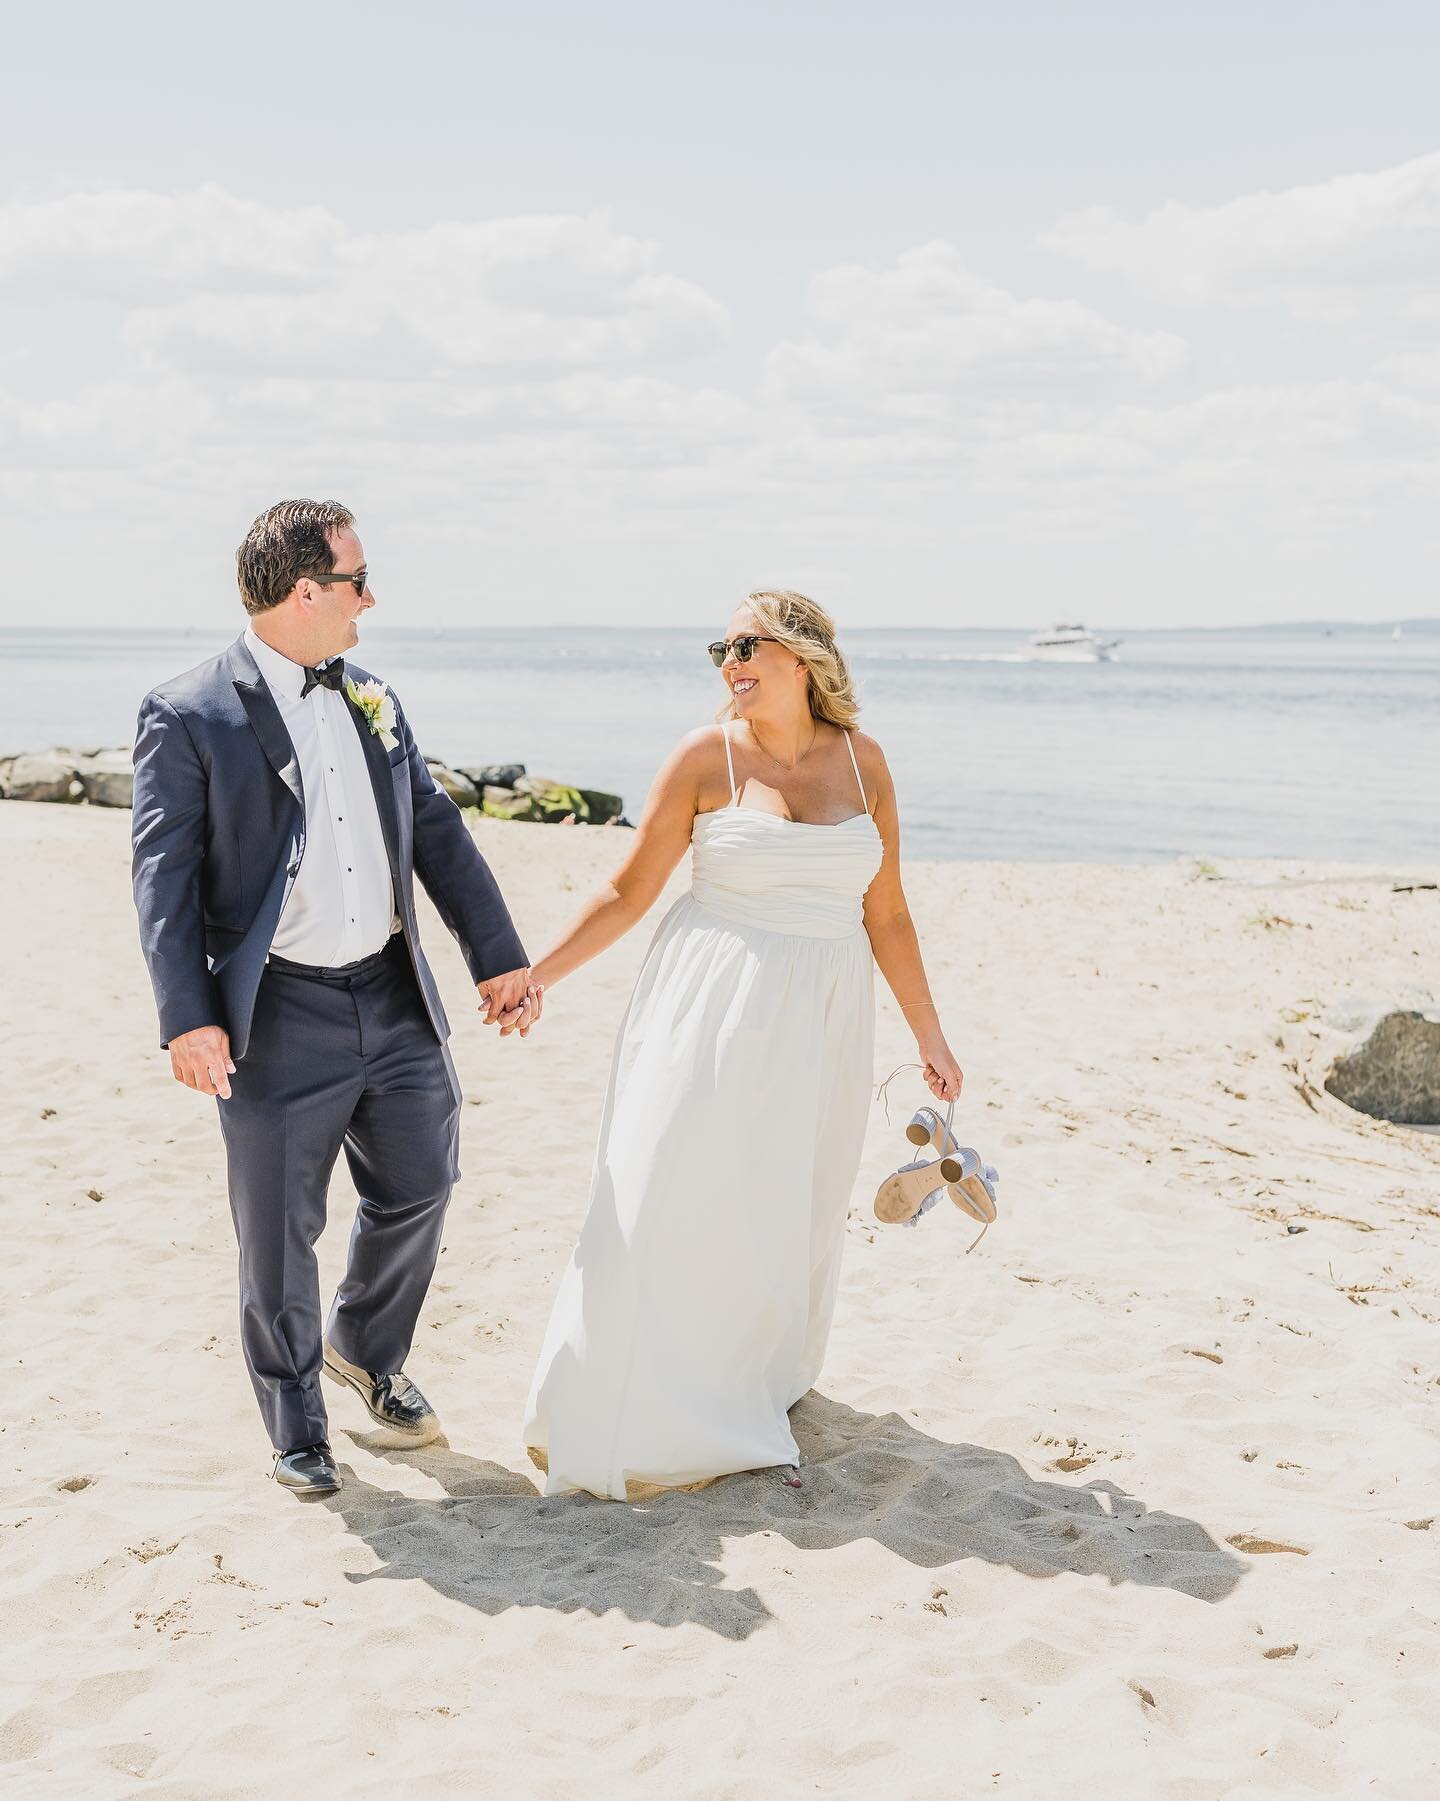 Bringing some sand and sun from Amy + Kevin&rsquo;s beautiful wedding day!